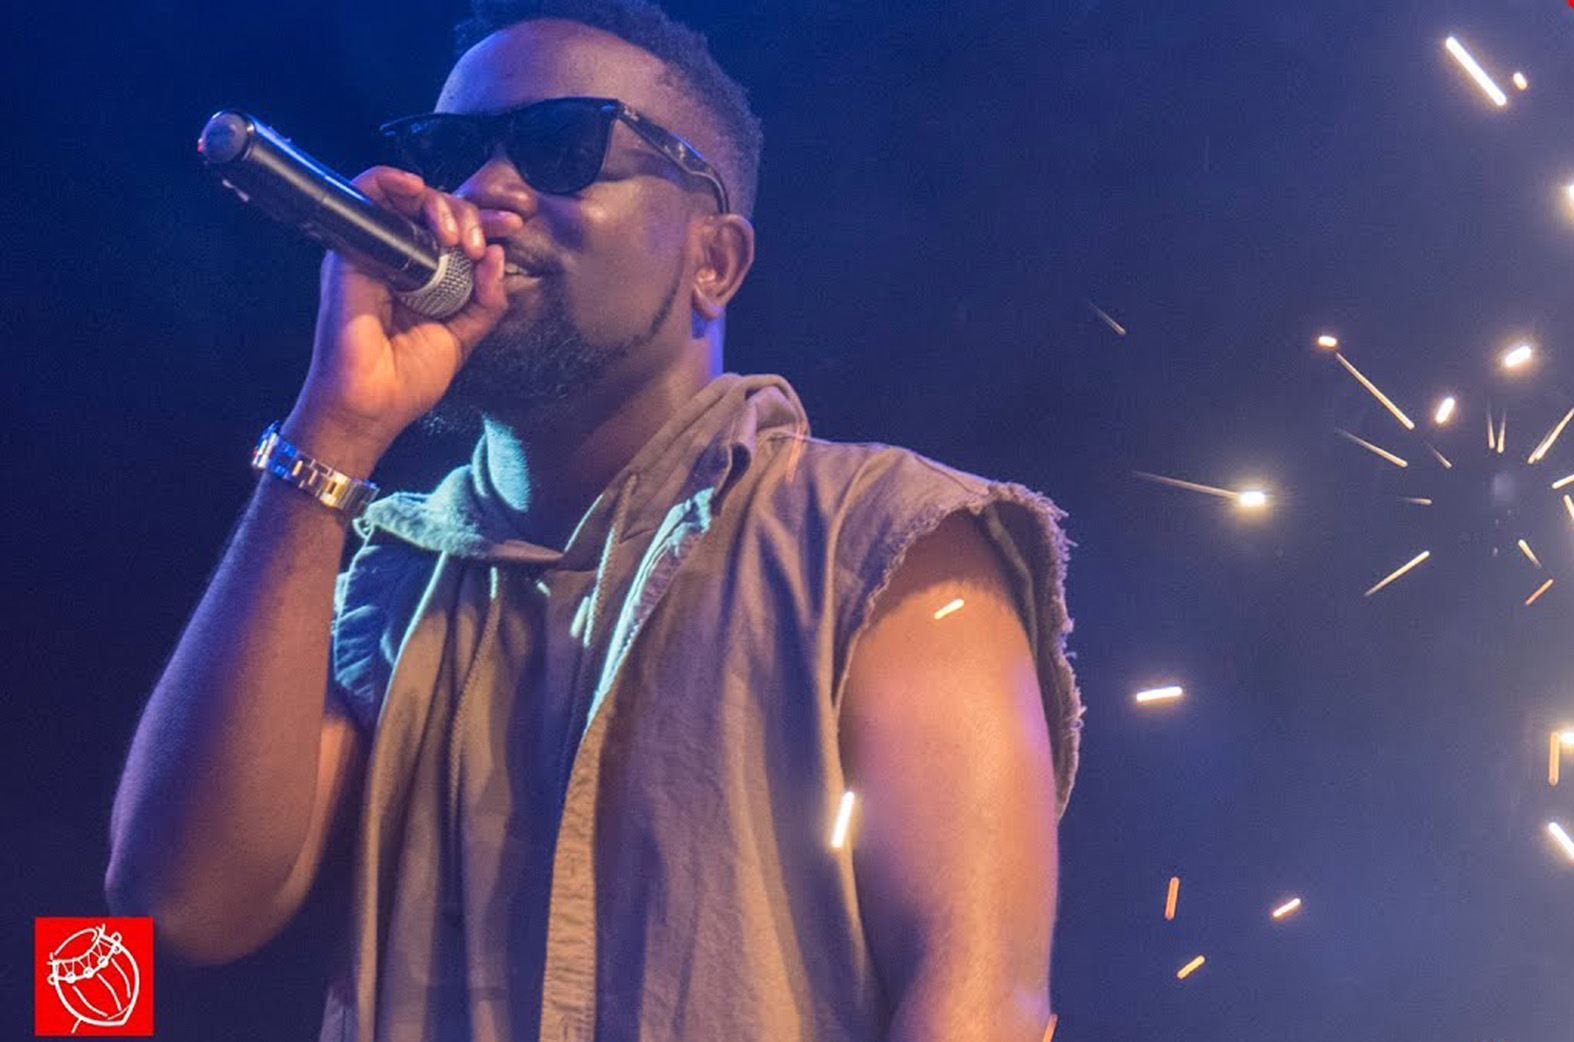 Video: Sarkodie goes back to his roots at VGMA 2018 celebration jam